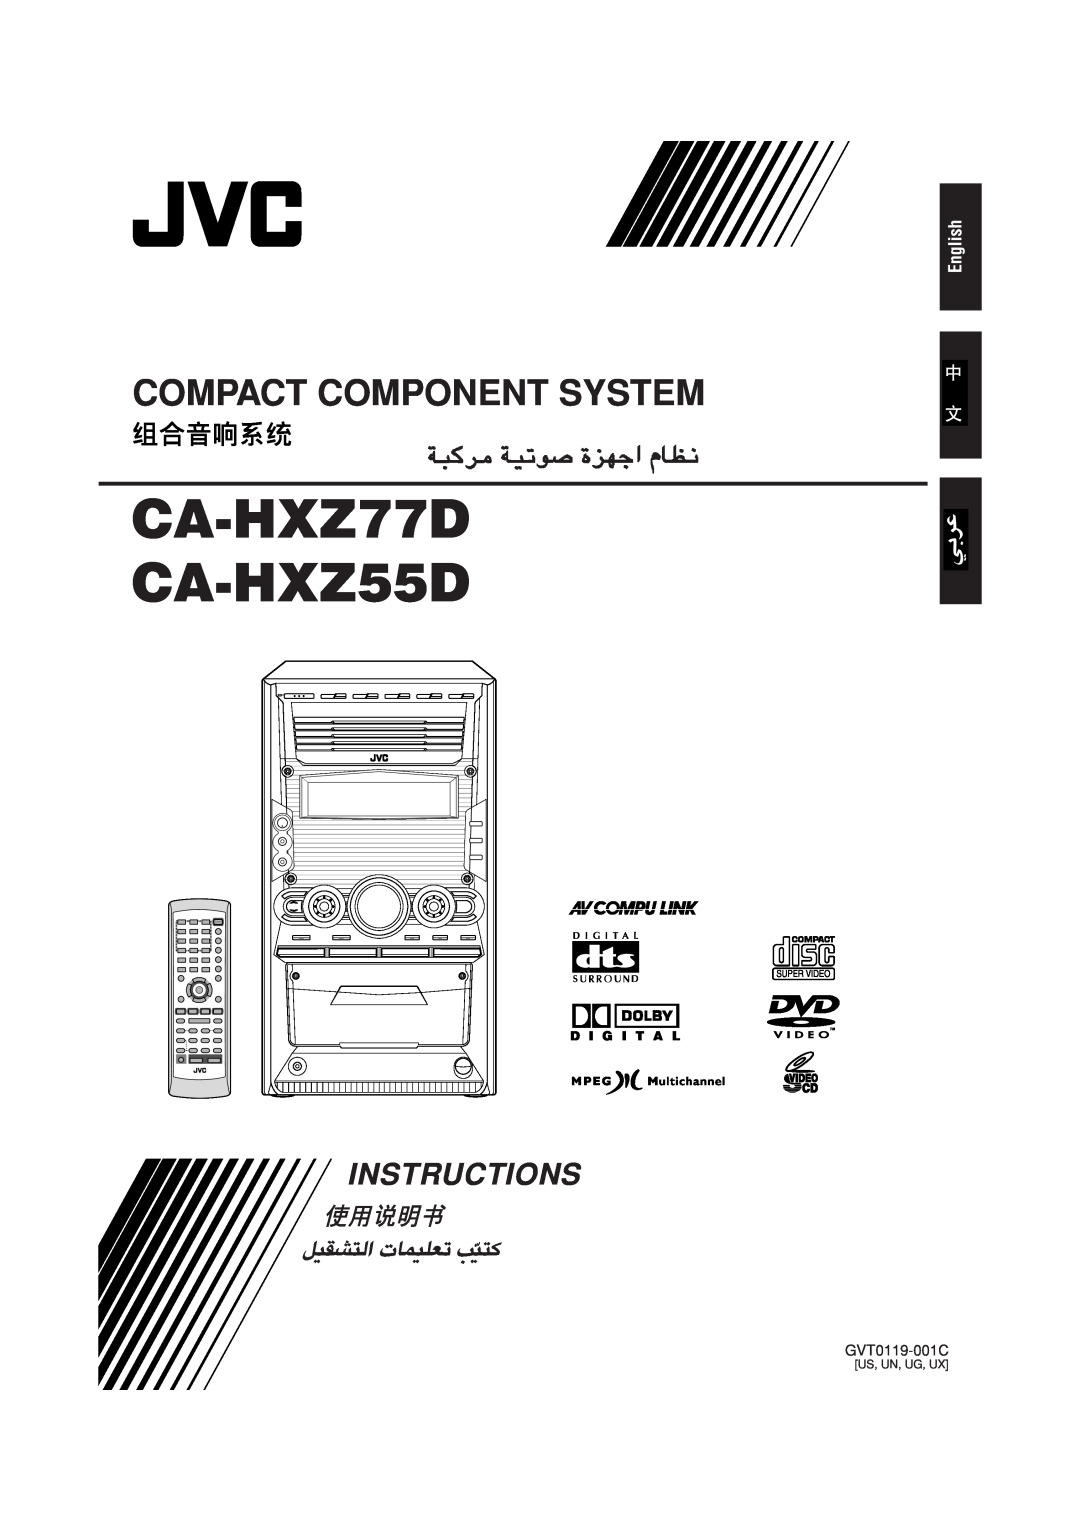 JVC manual Compact Component System, English, CA-HXZ77D CA-HXZ55D, Instructions, GVT0119-001C, D I G I T A L 